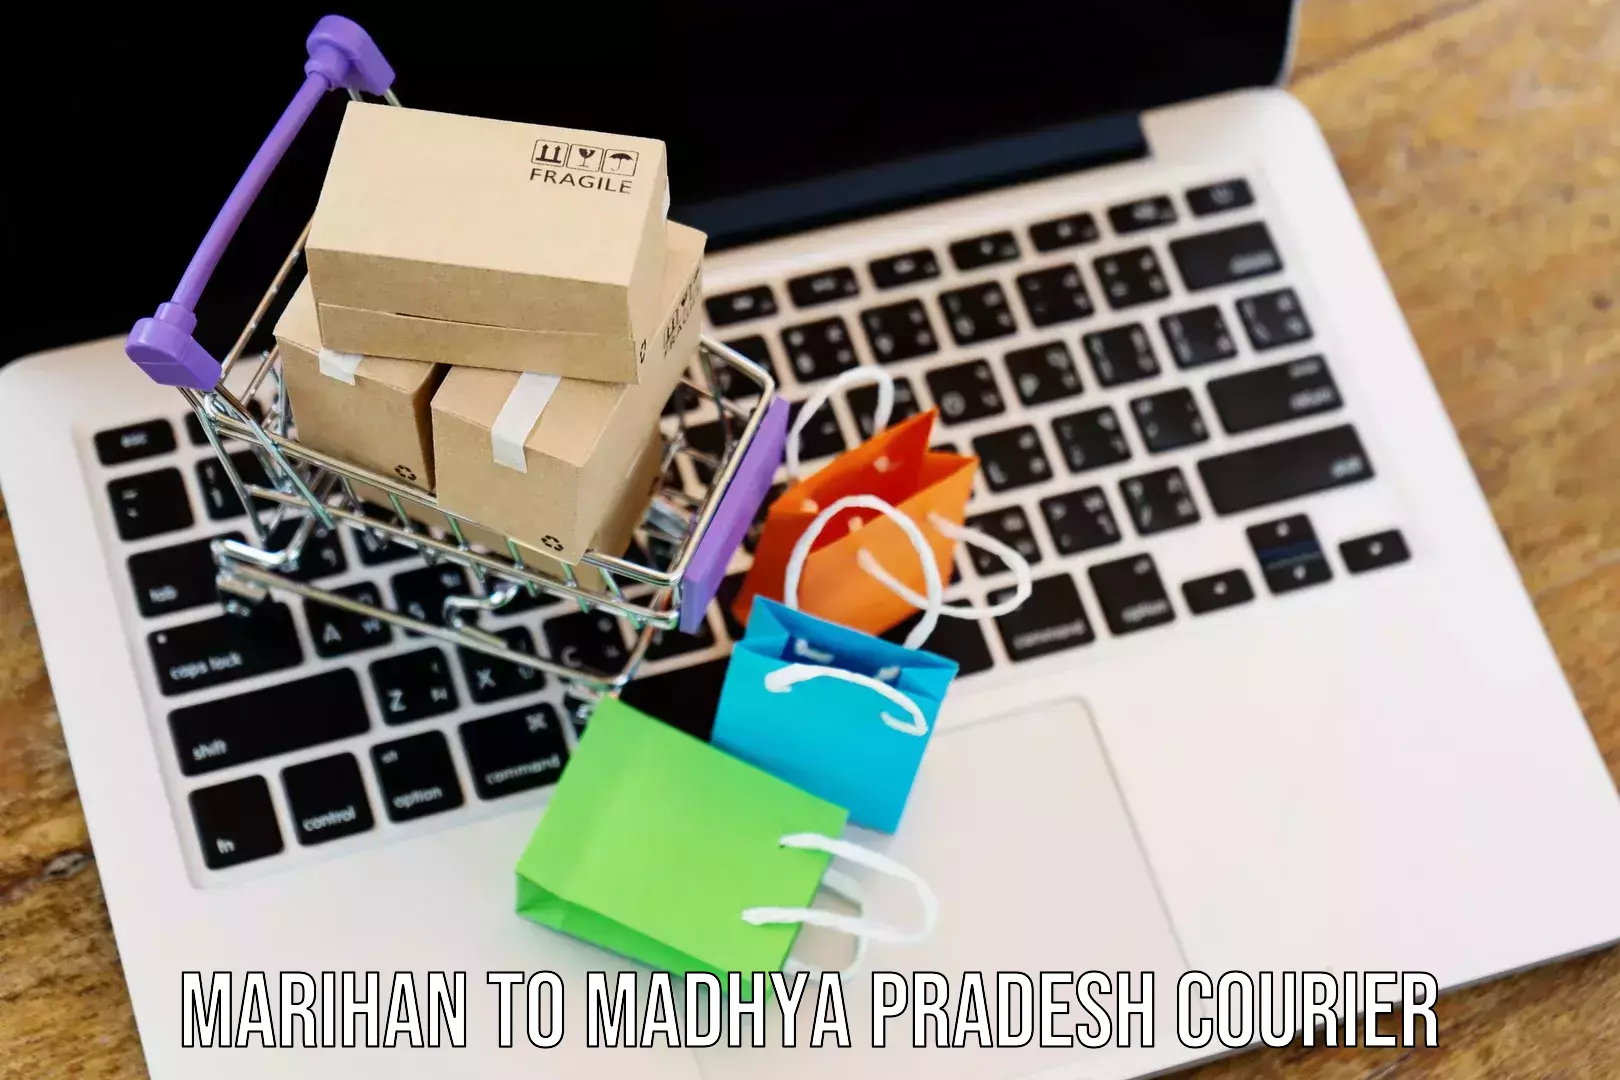 Personalized courier experiences Marihan to Madhya Pradesh